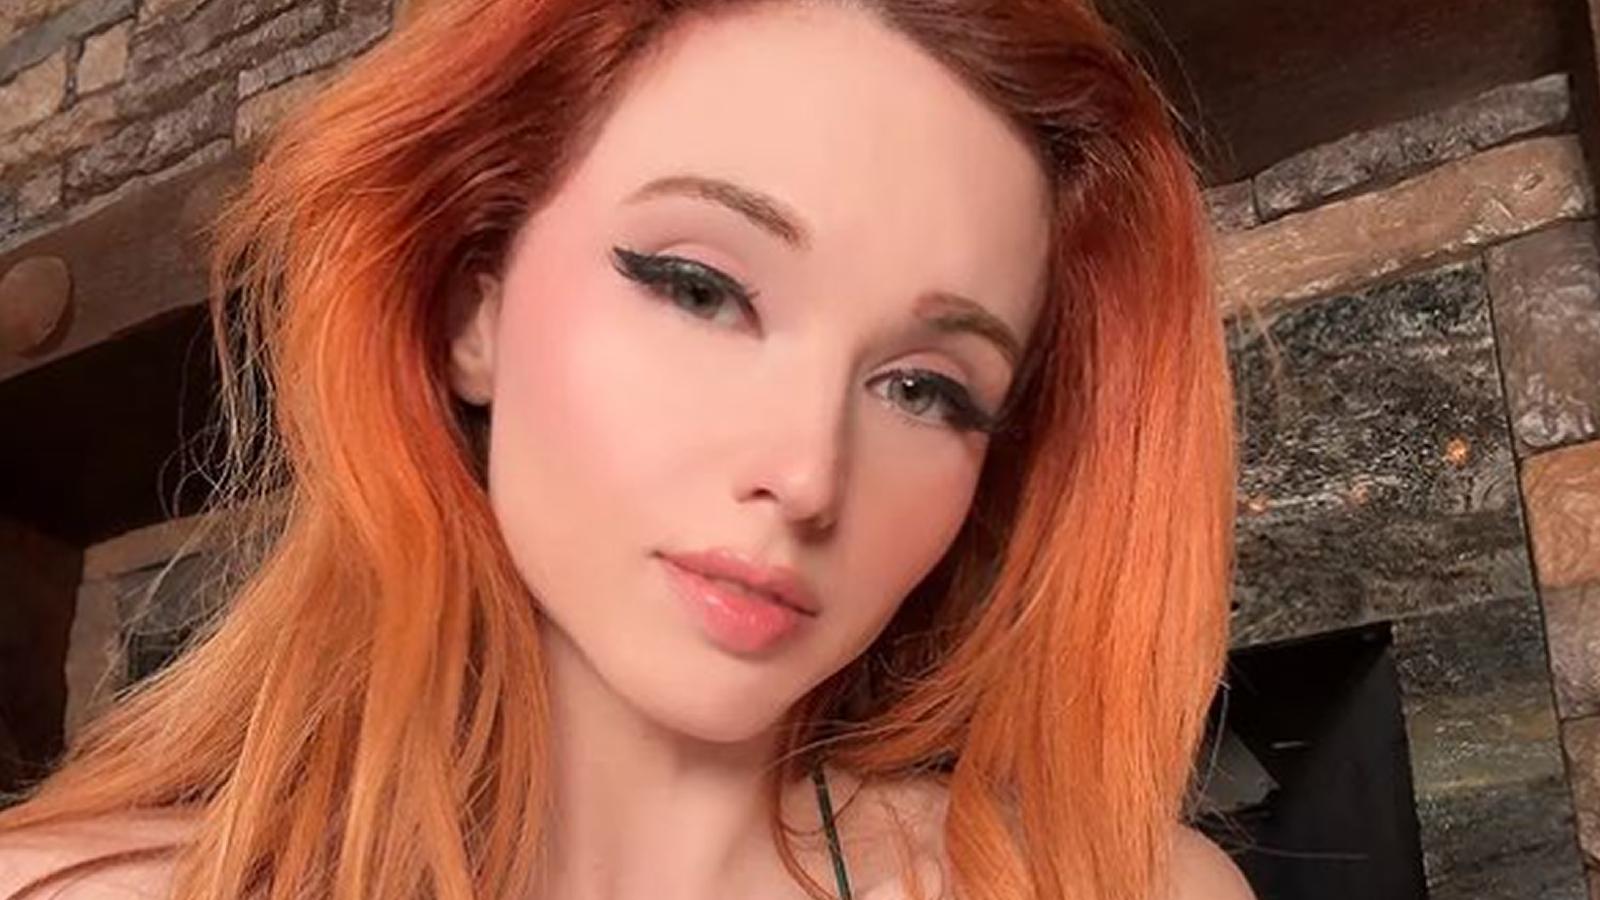 Amouranth claims Twitch unpartnered her channel with no explanation